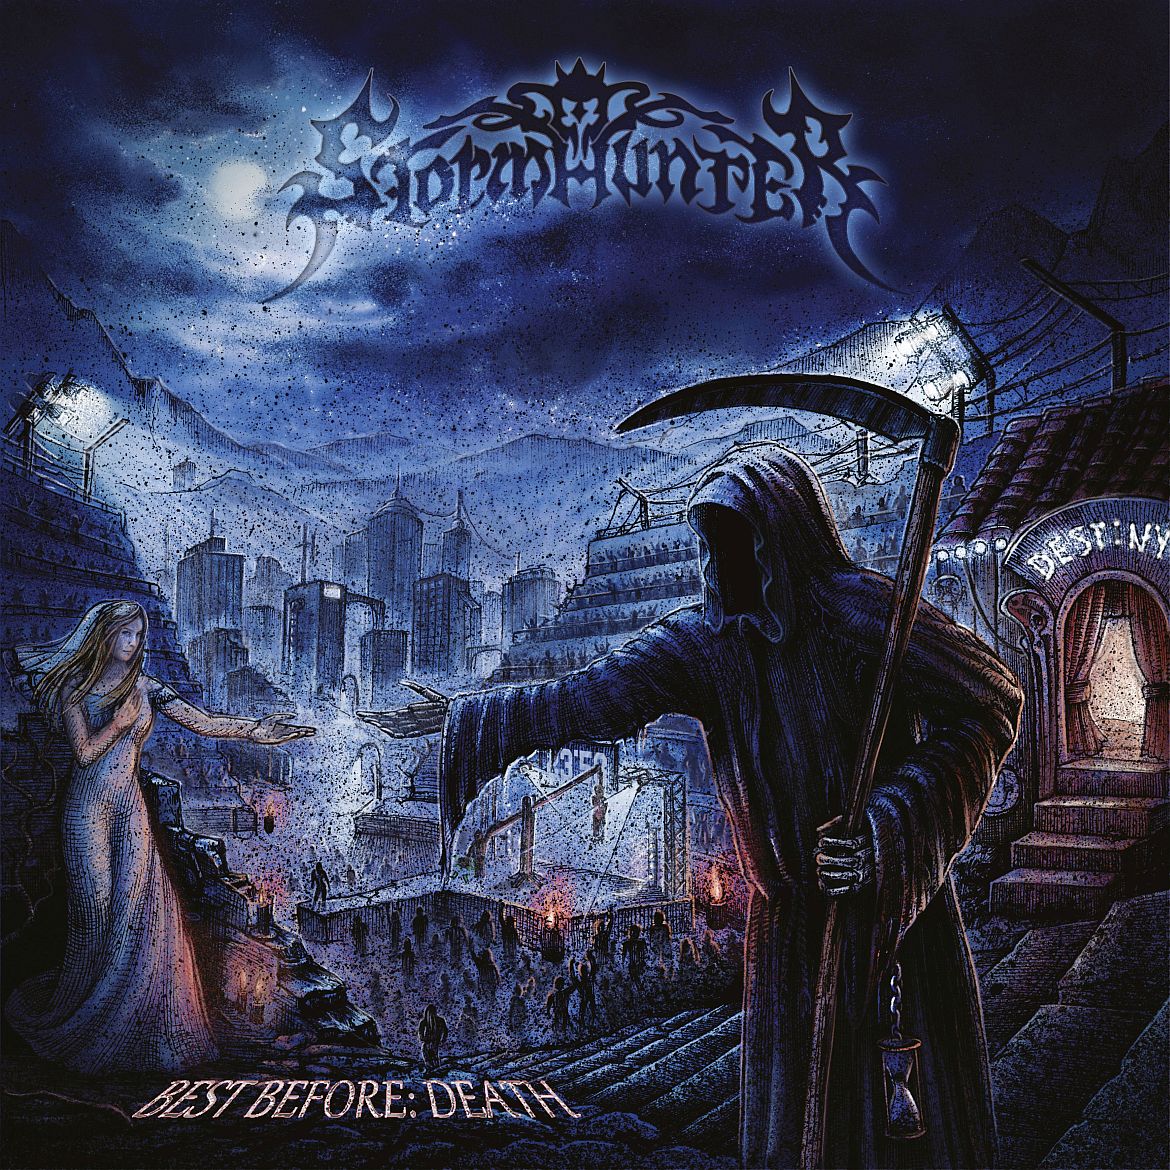 Stormhunter - Best Before: Death